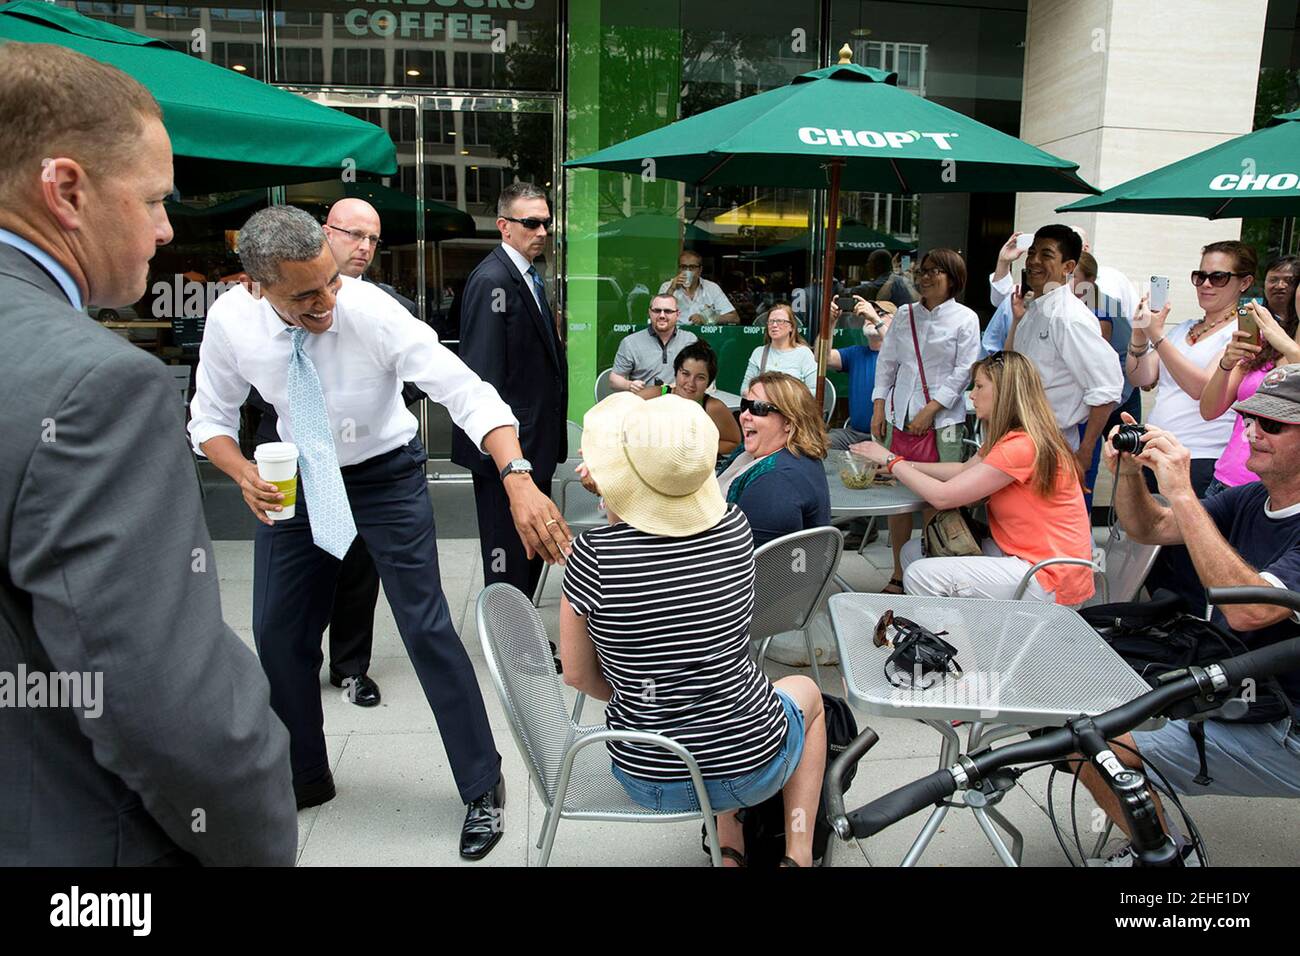 President Barack Obama greets people sitting outside a Chop't restaurant after dropping by a Starbucks on Pennsylvania Avenue in Washington, D.C., June 9, 2014. Stock Photo